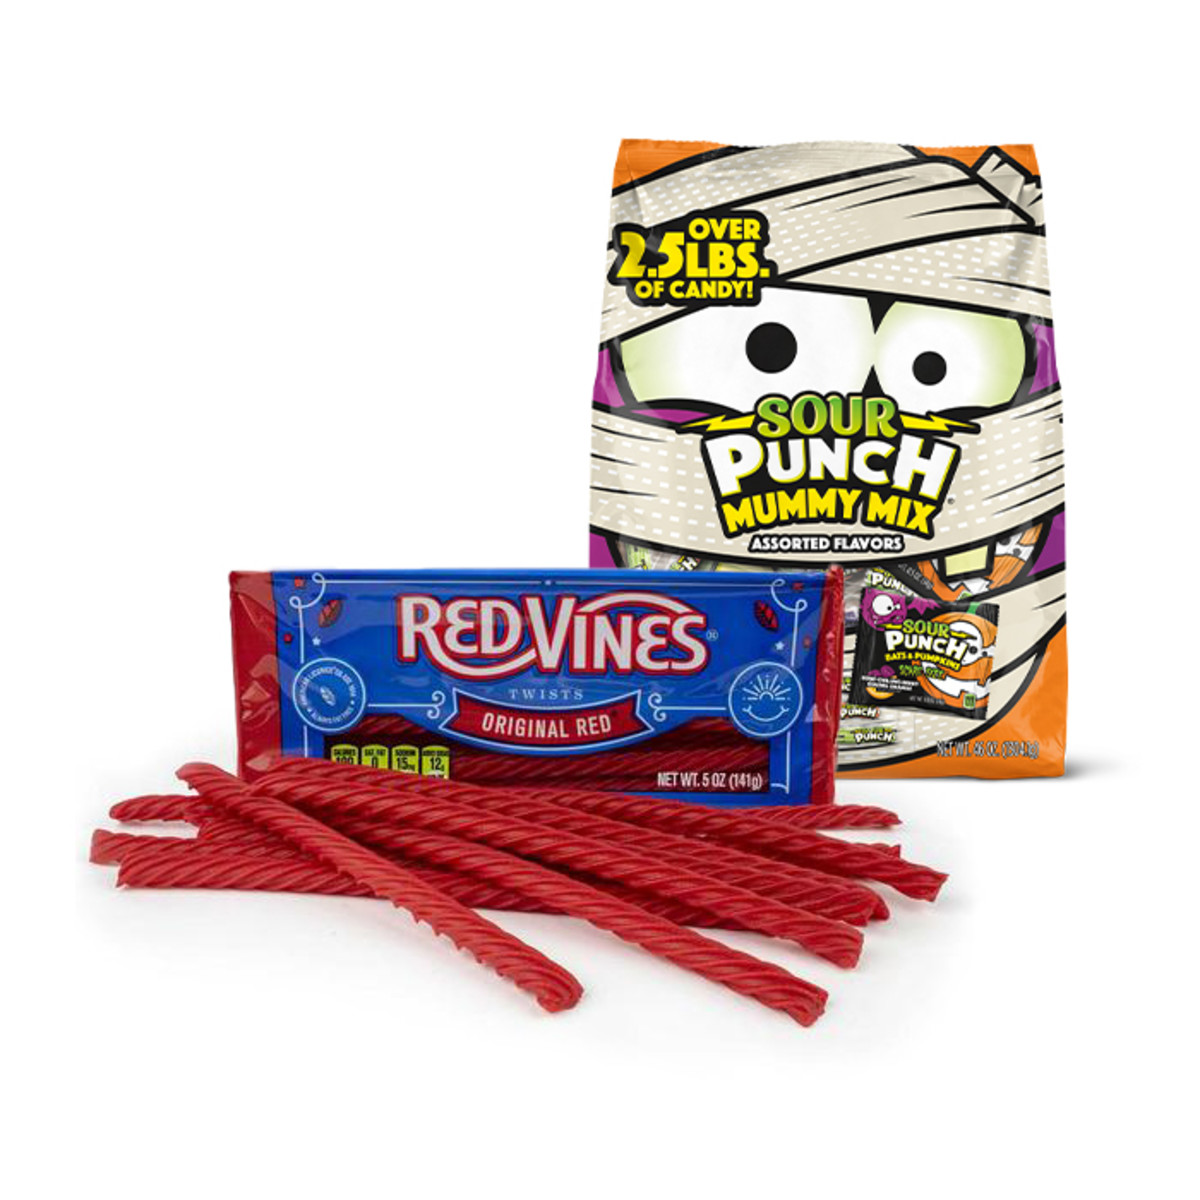 RedVines Sourpunch Package